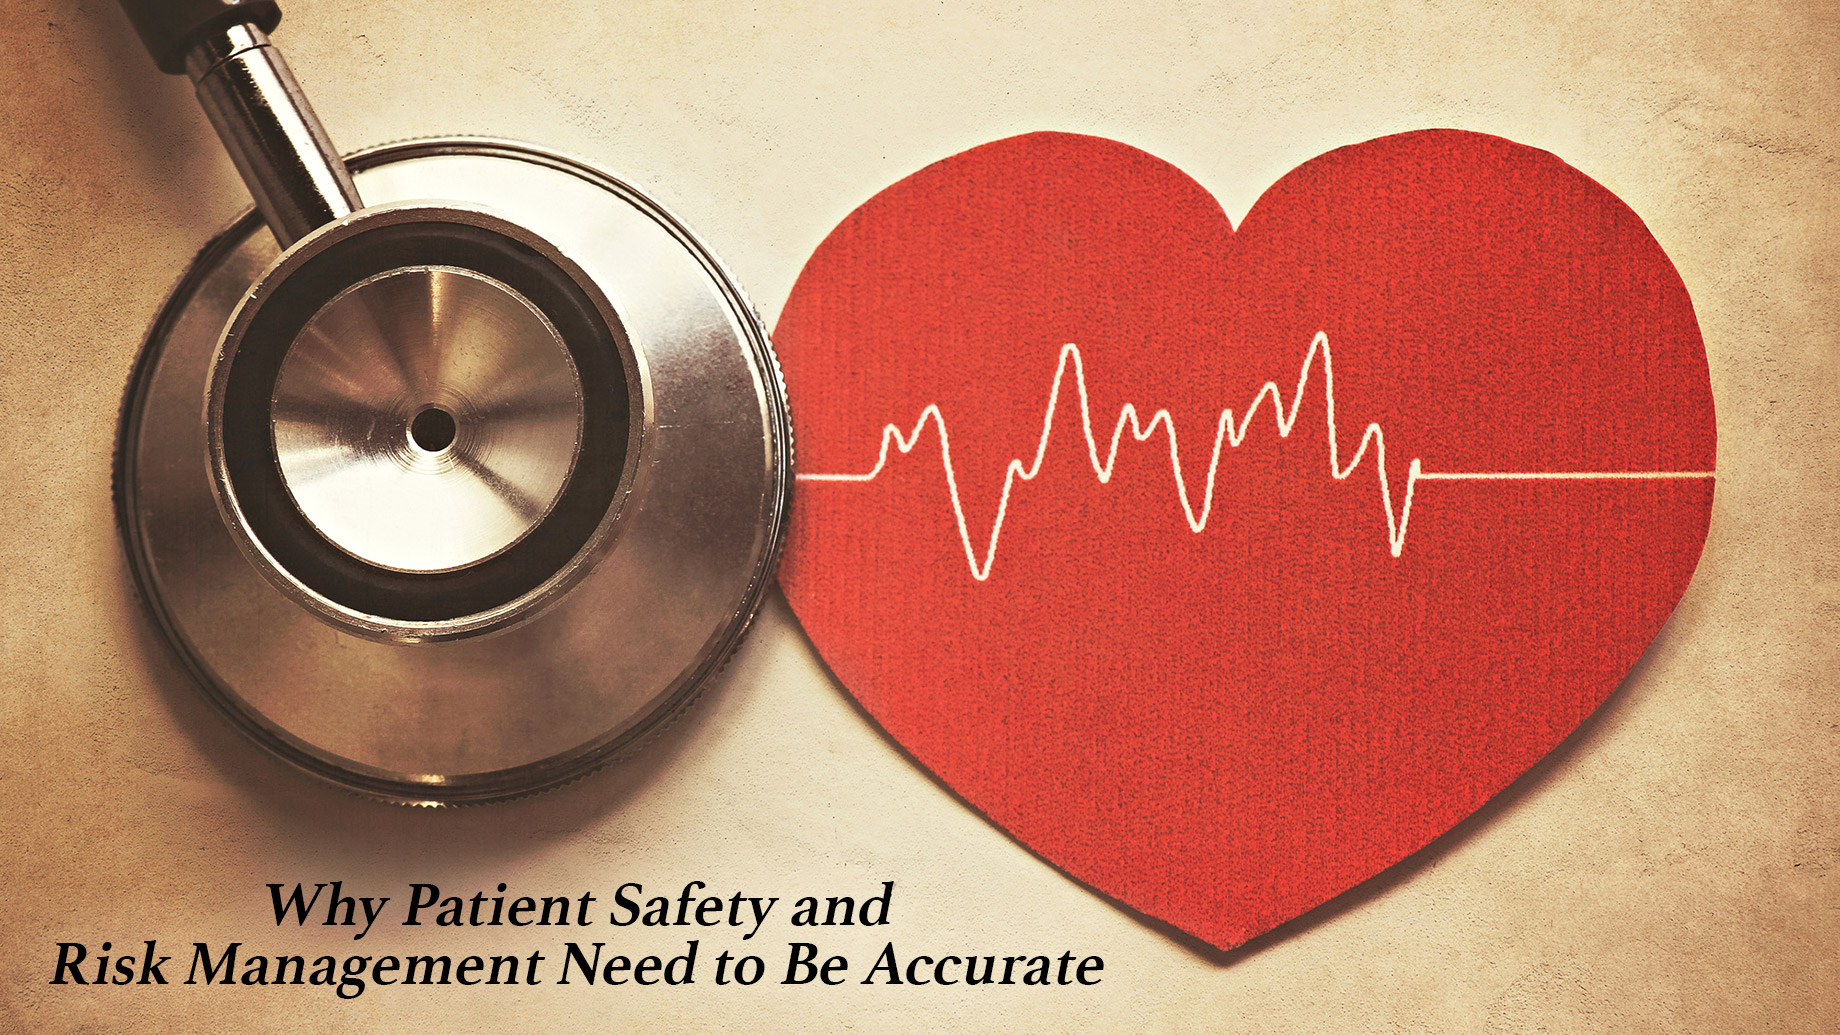 Why Patient Safety and Risk Management Need to Be Accurate